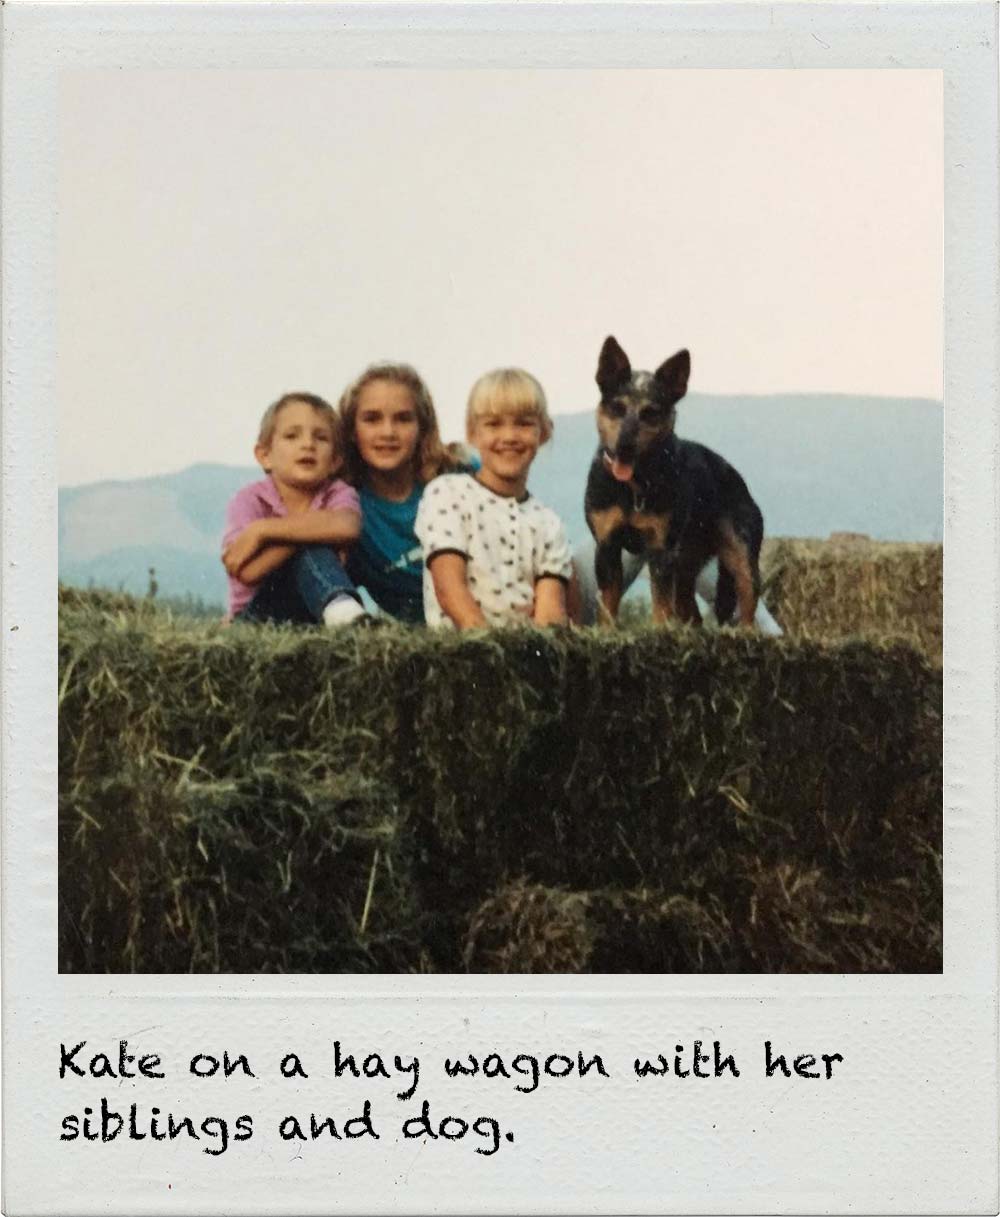 Kate on a hay wagon with her siblings and dog.